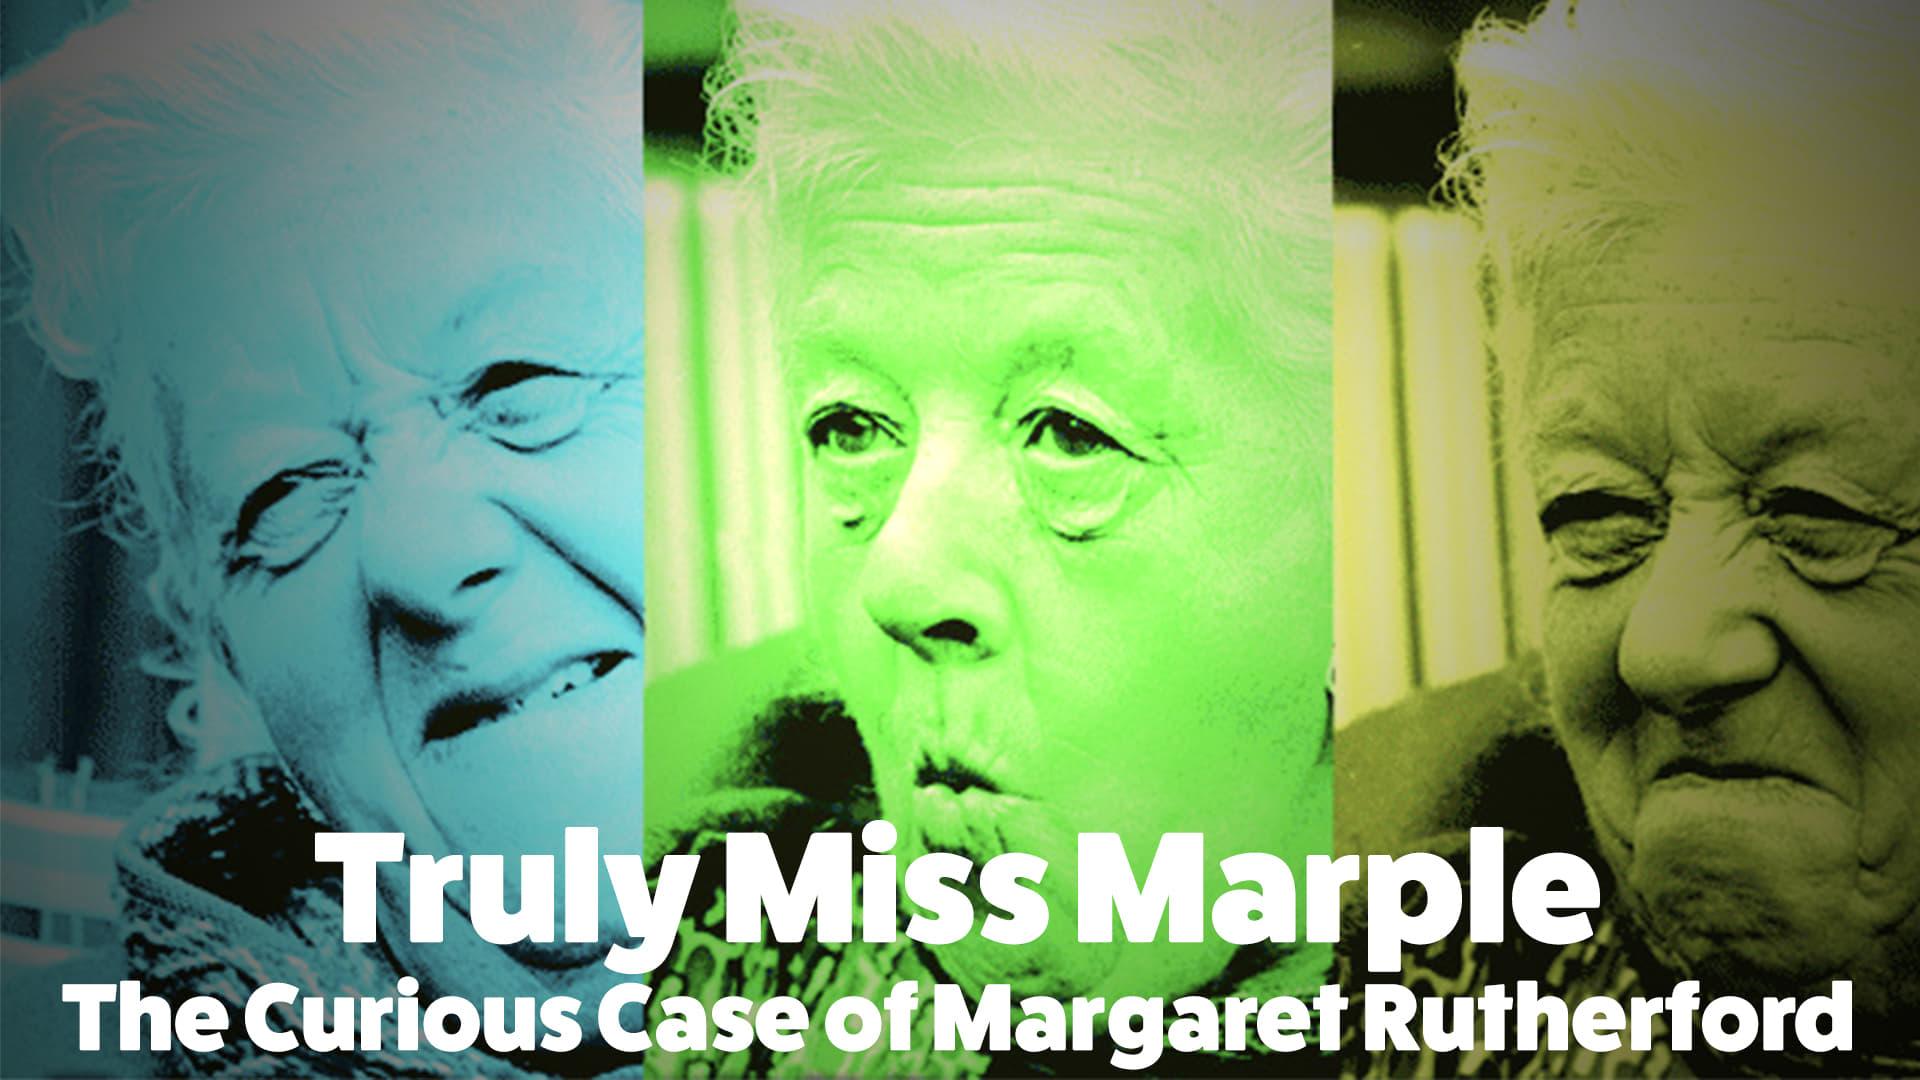 Truly Miss Marple: The Curious Case of Margaret Rutherford backdrop